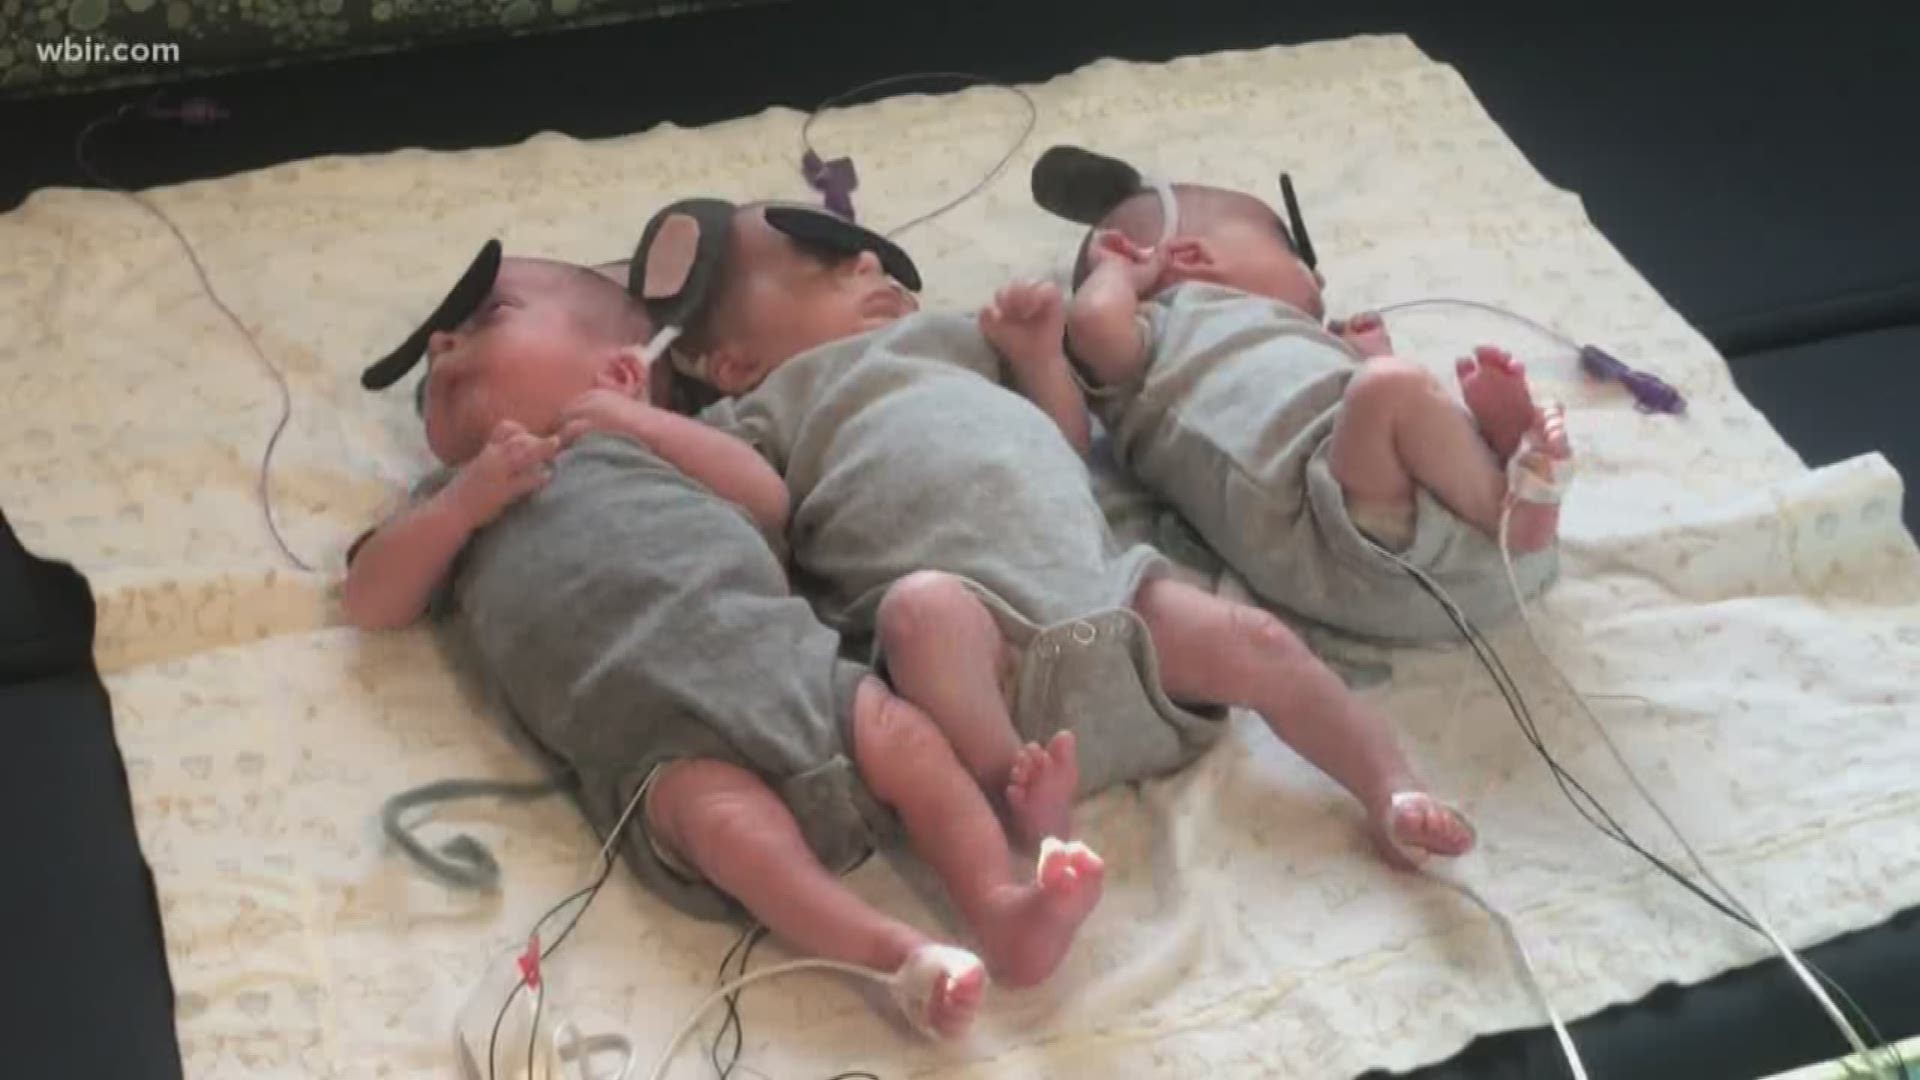 At UT Medical Center, the NICU is celebrating Halloween with adorable costumes.